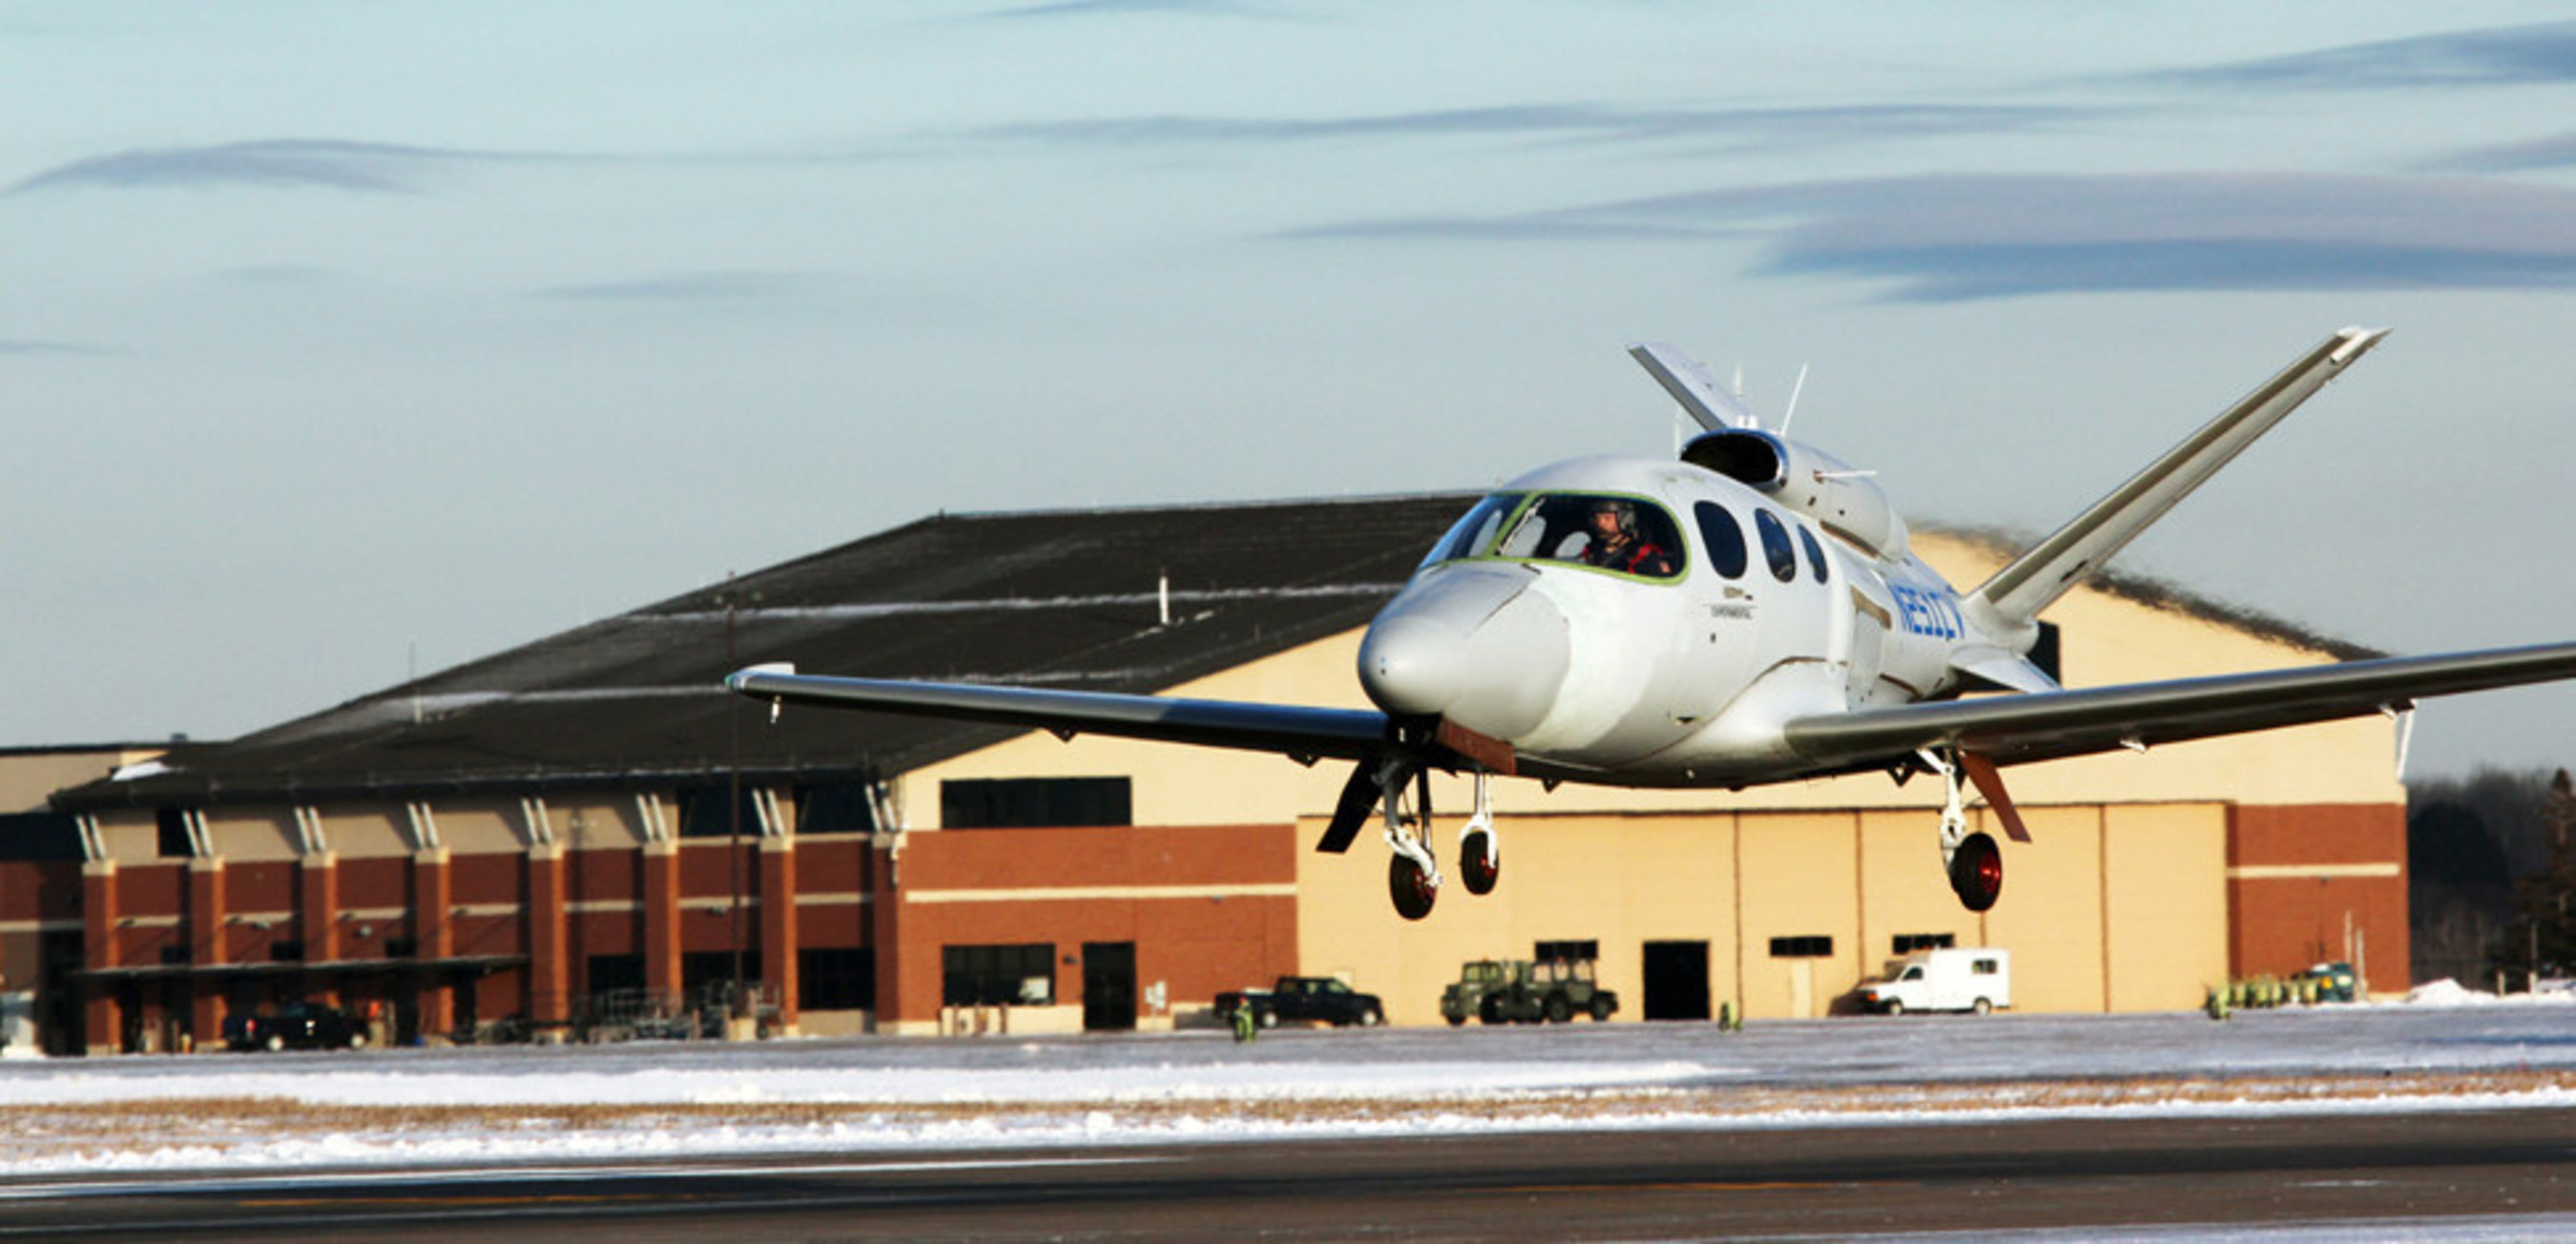 Cirrus Aircraft announced the successful first flight of their second certification flight test aircraft, C1, in their Vision SF50 personal jet program.